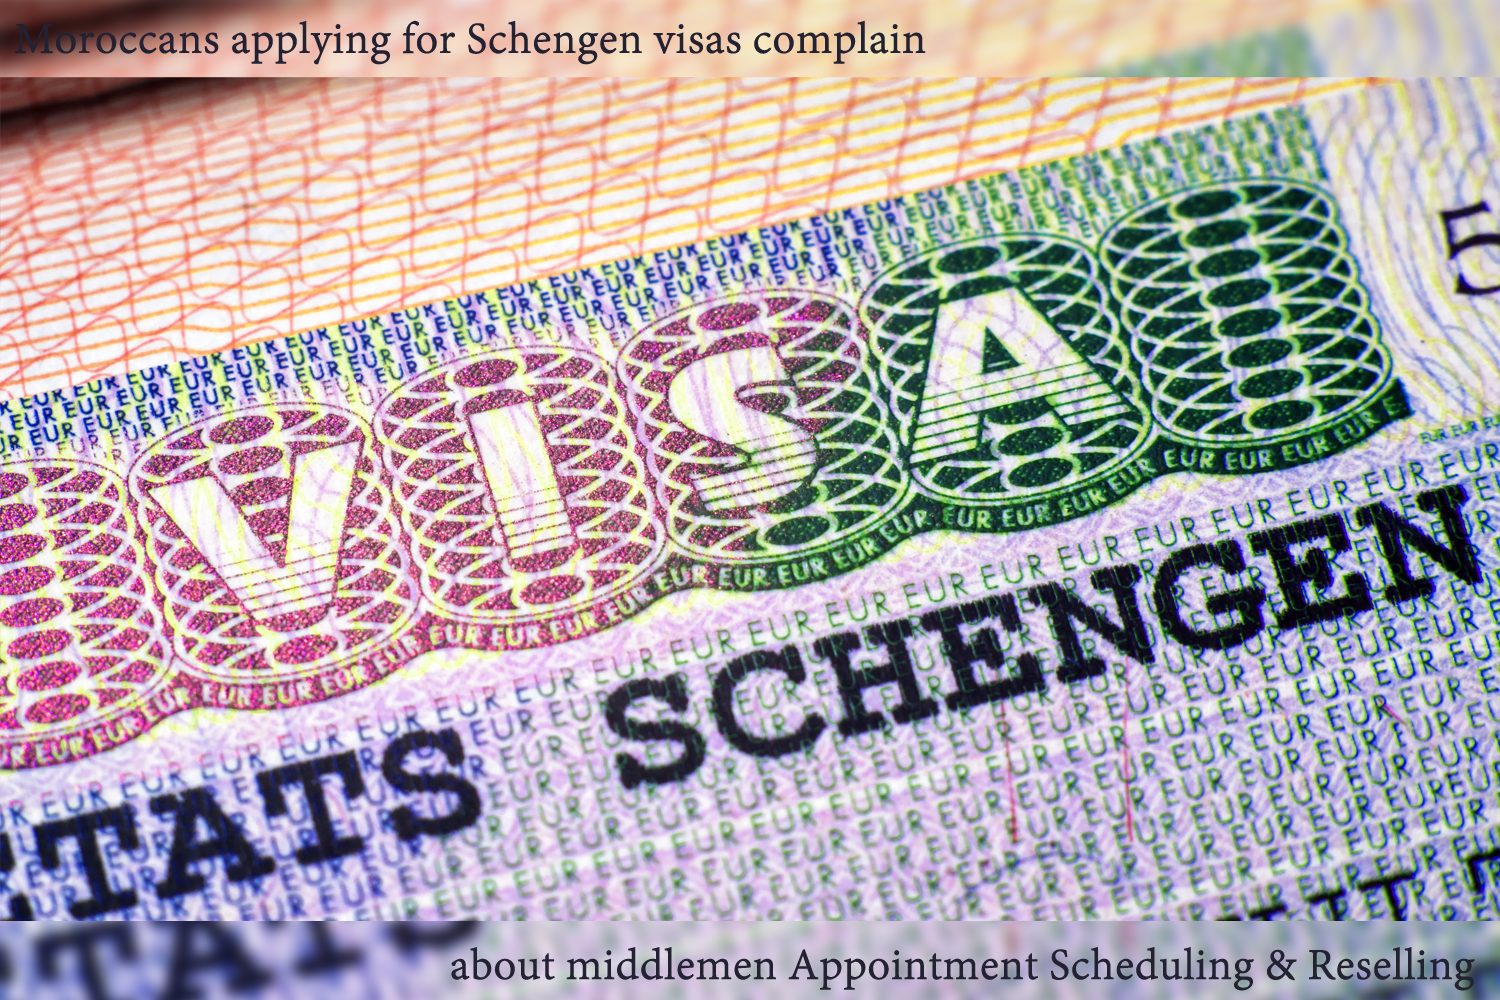 Moroccans applying for Schengen visas complain about middlemen Appointment Scheduling & Reselling